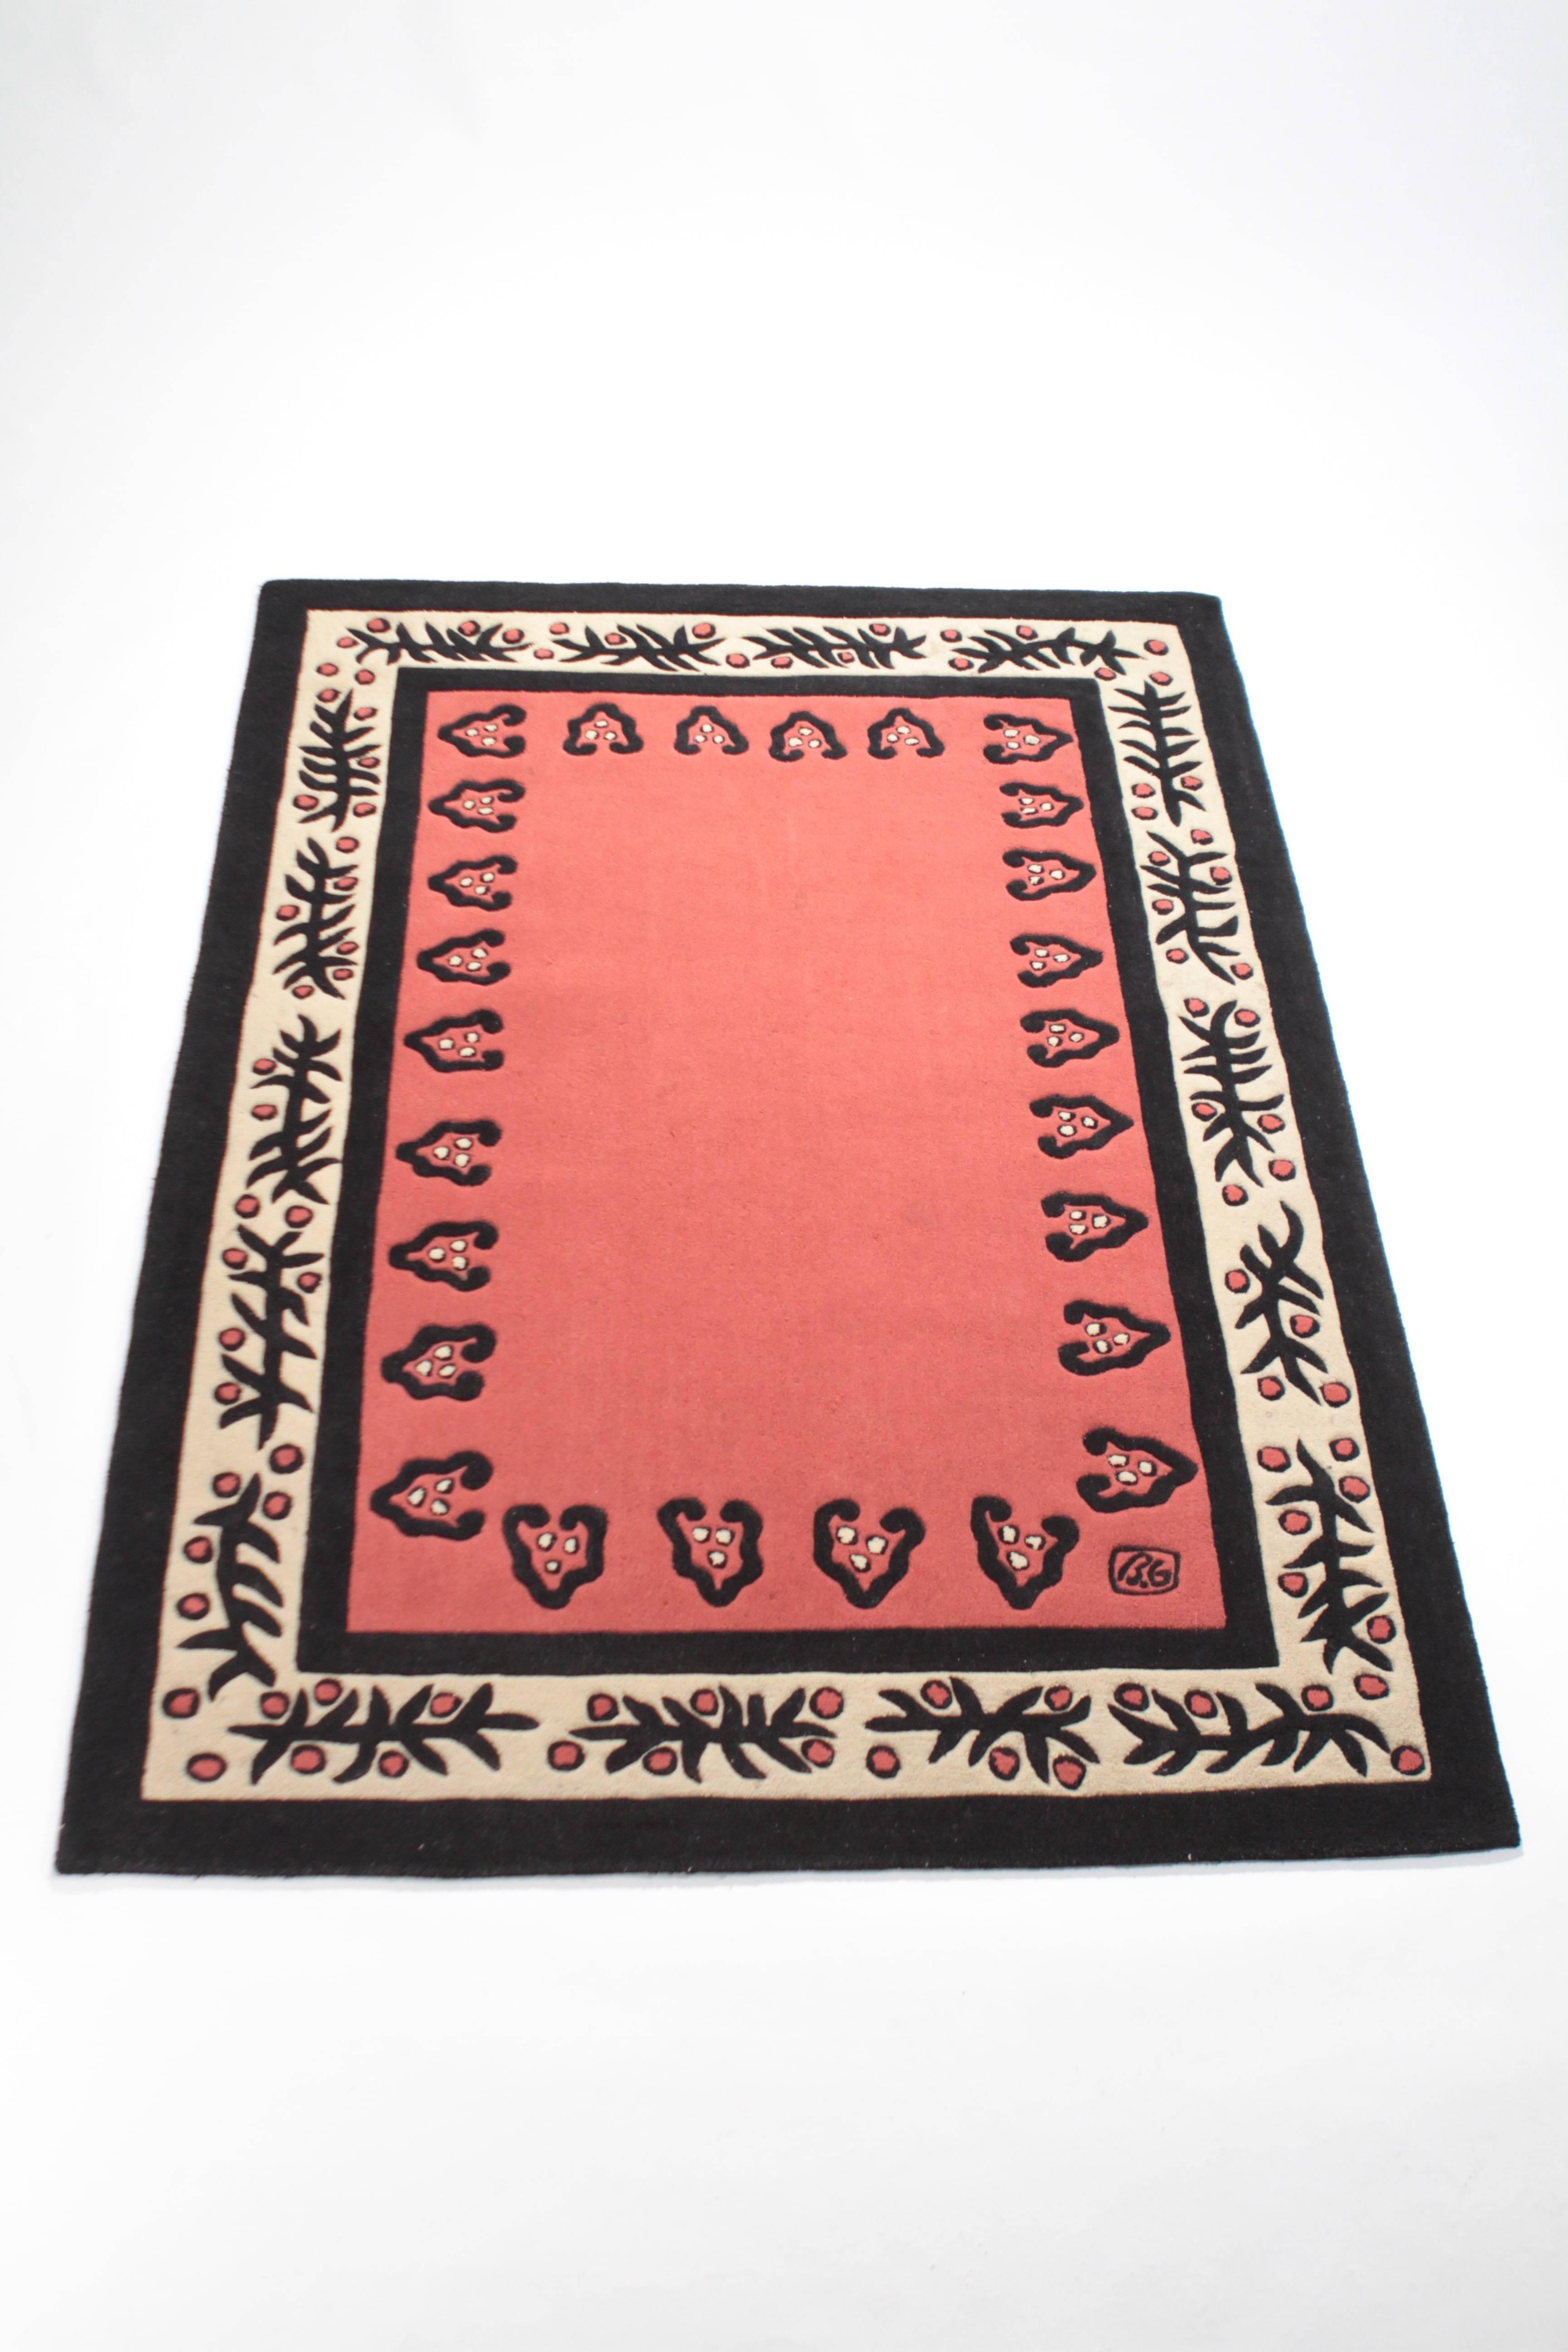 Rêverie carpet designed by Garouste and Bonetti in tufted wool, manufactured by Sam Laïk in 1993. This beautiful piece features a very poetic red pattern and is signed BG.
This rug has been professionally cleaned and few marks from previous use can